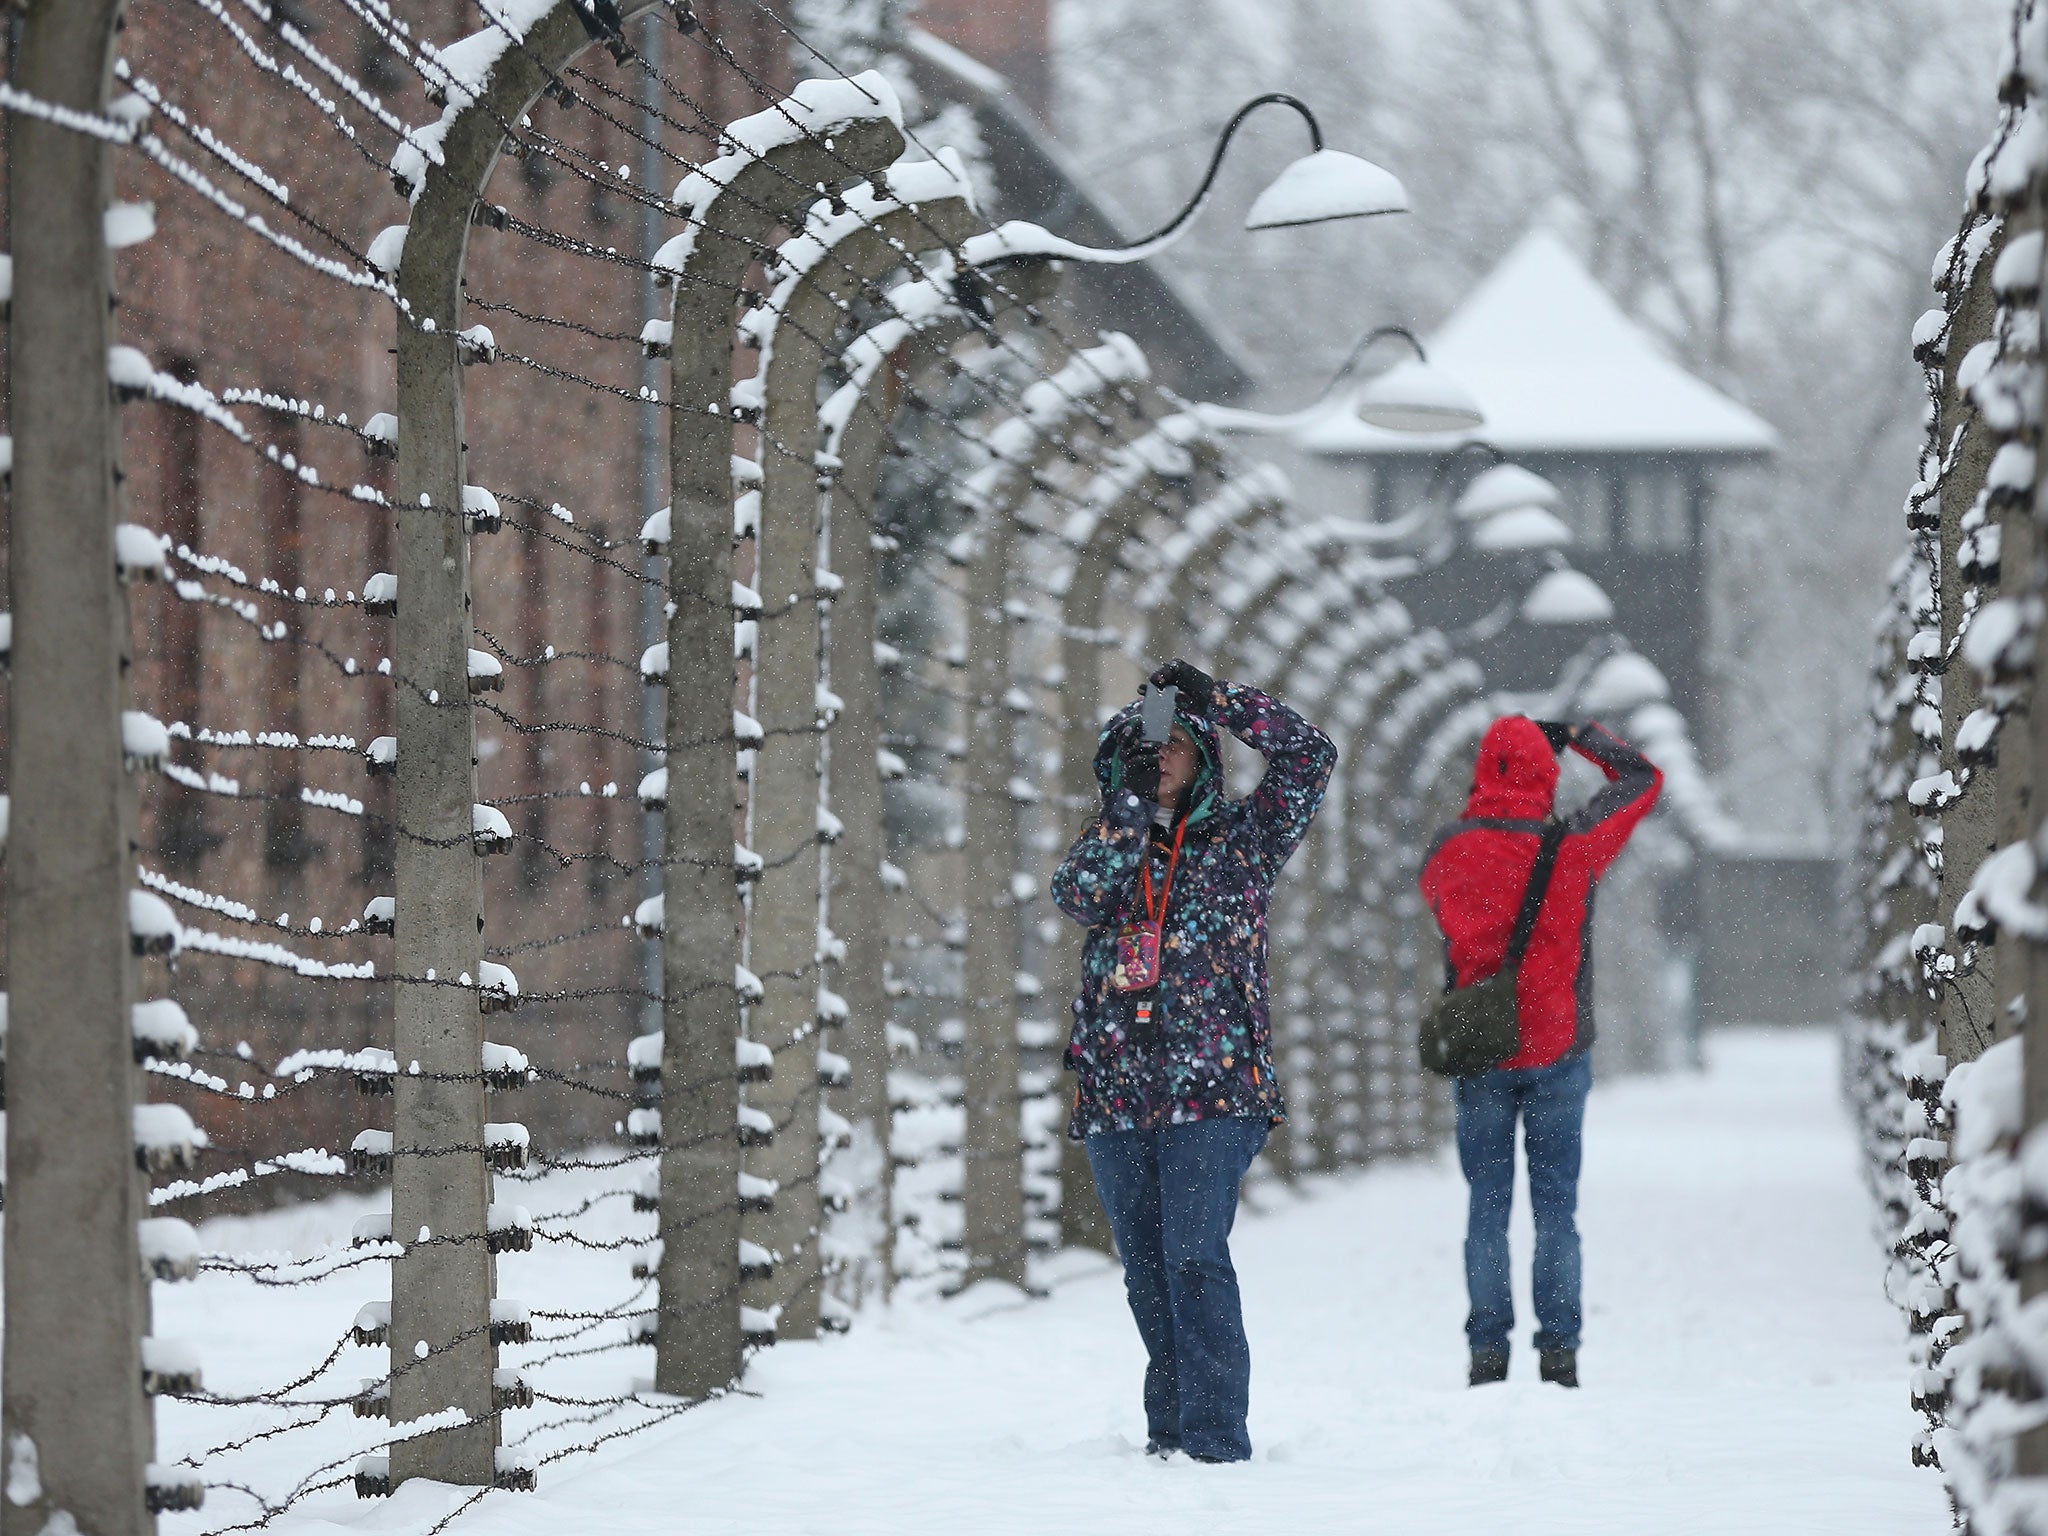 Visitors at Auschwitz in the snow. A ceremony today will mark the 70th anniversary of its liberation by the Soviet army in 1945